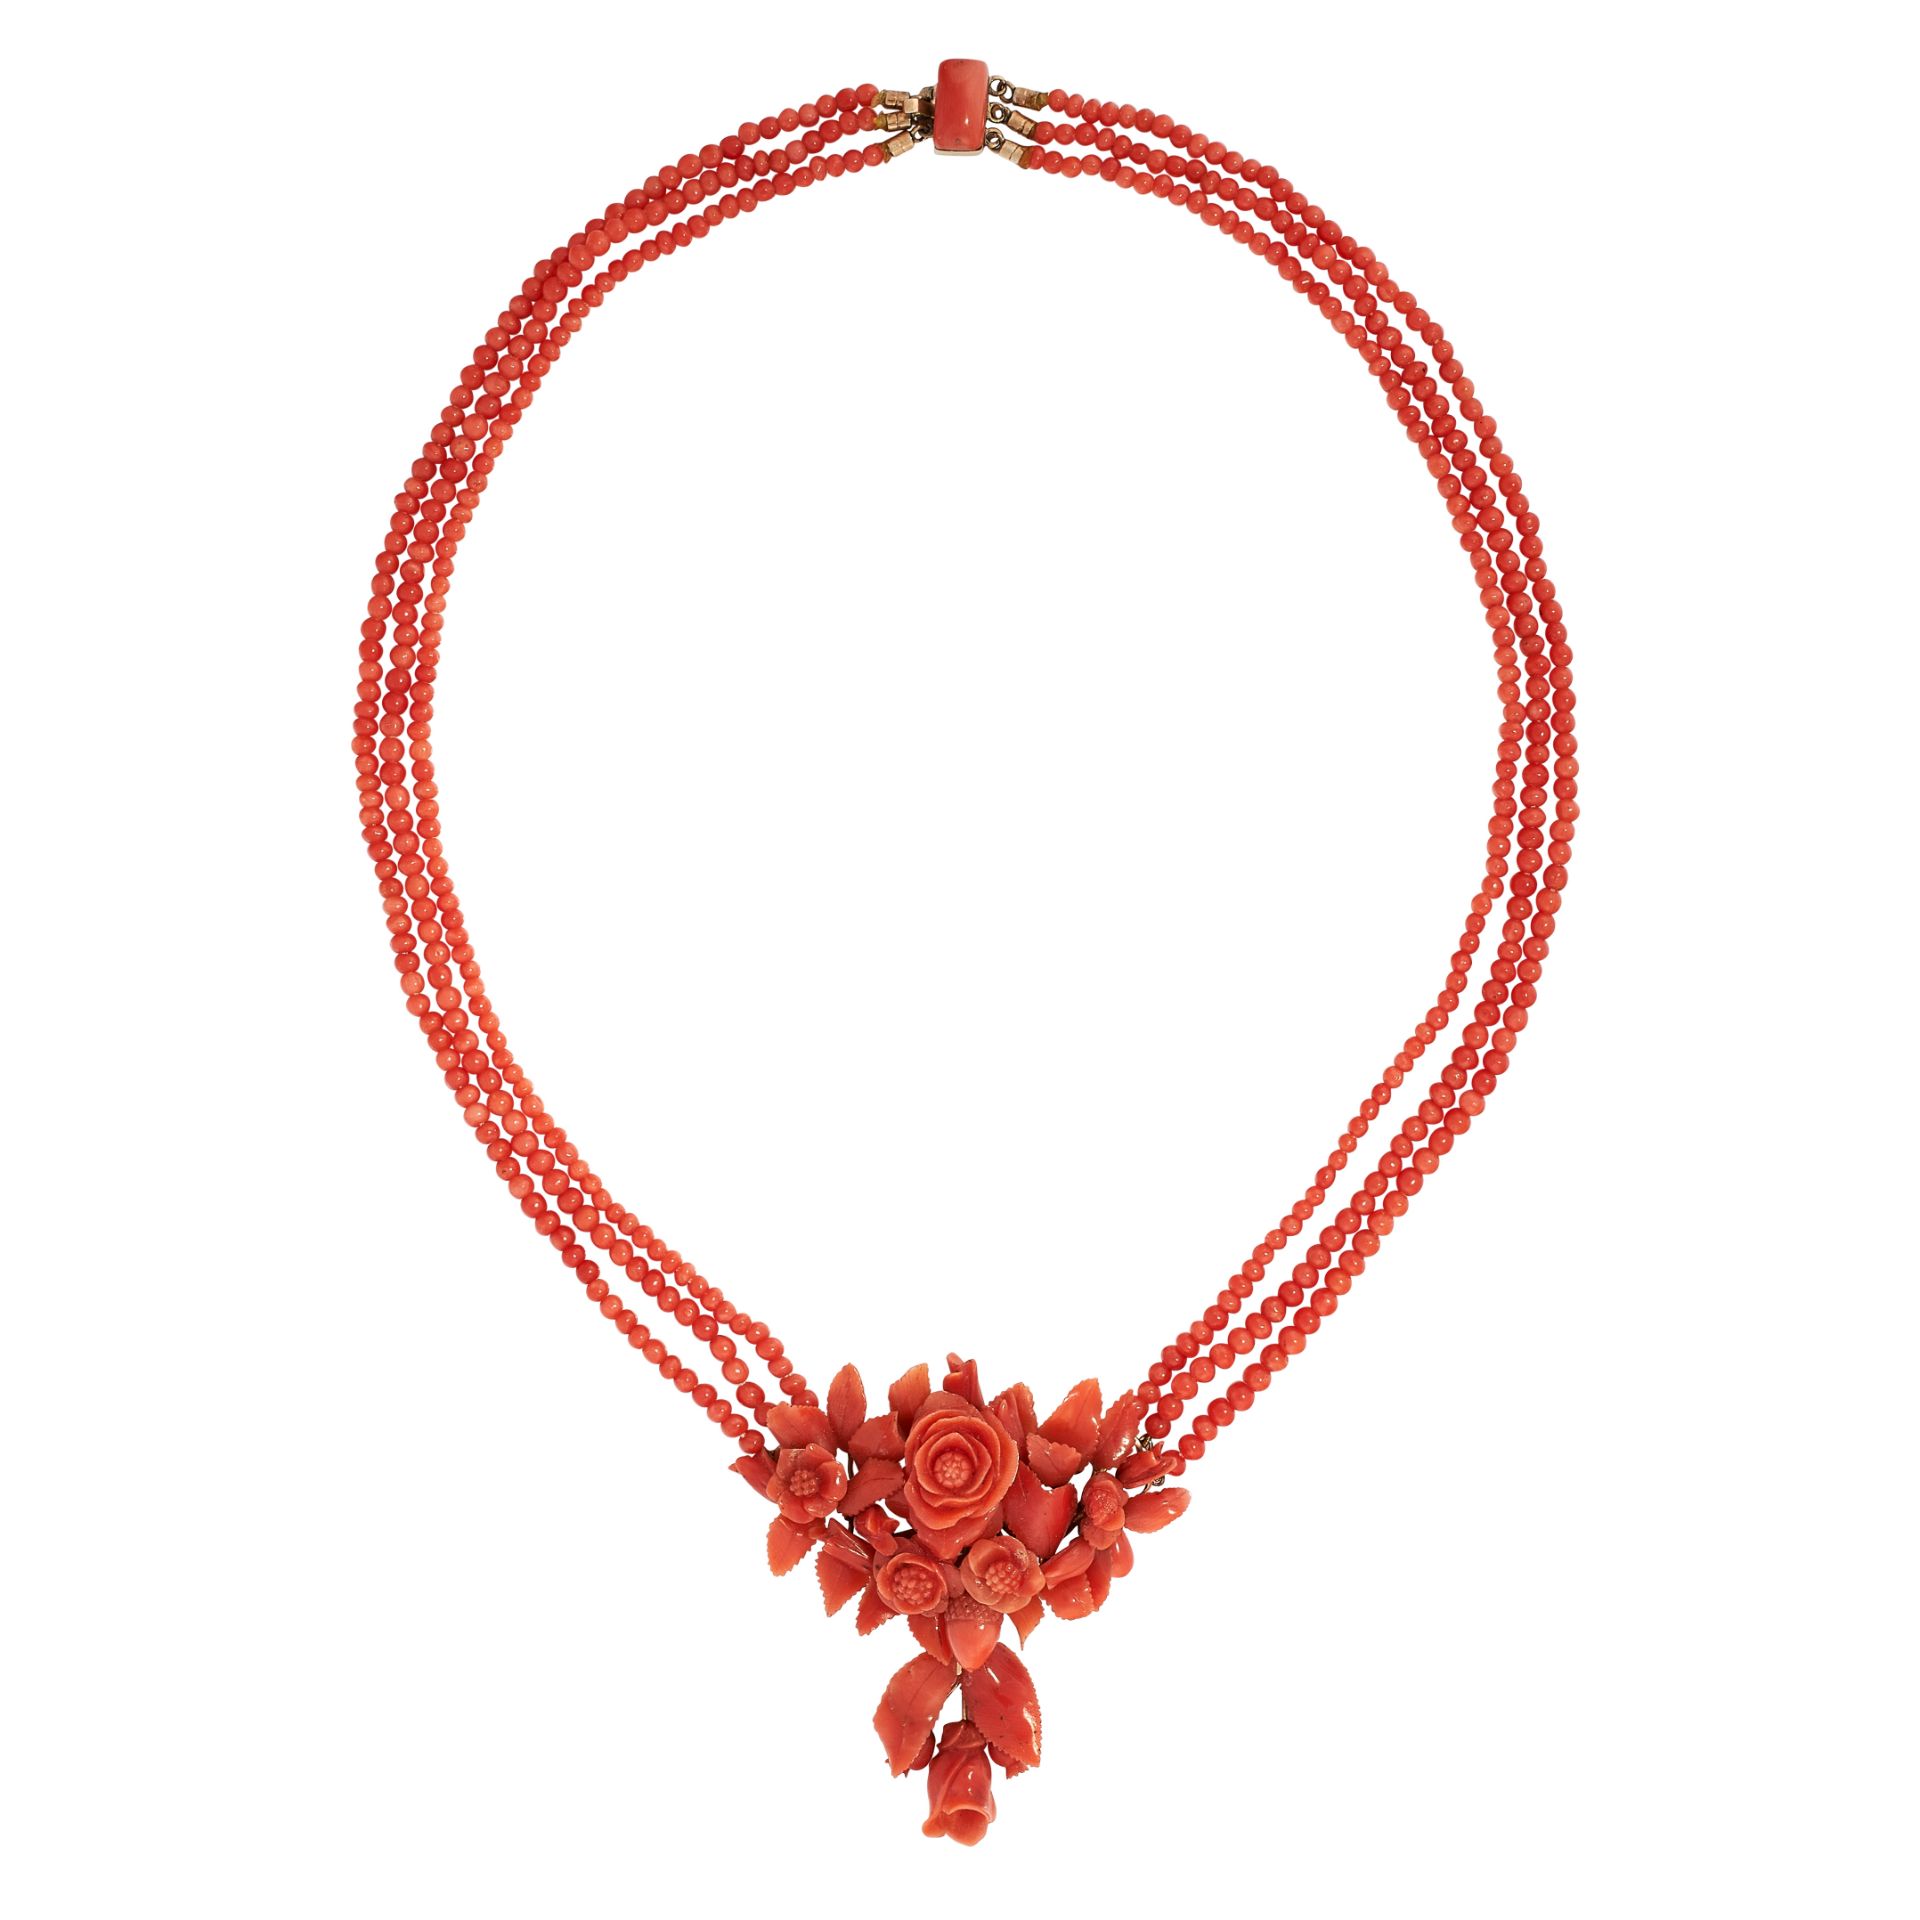 AN ANTIQUE CARVED CORAL NECKLACE, 19TH CENTURY comprising three rows of polished coral beads,